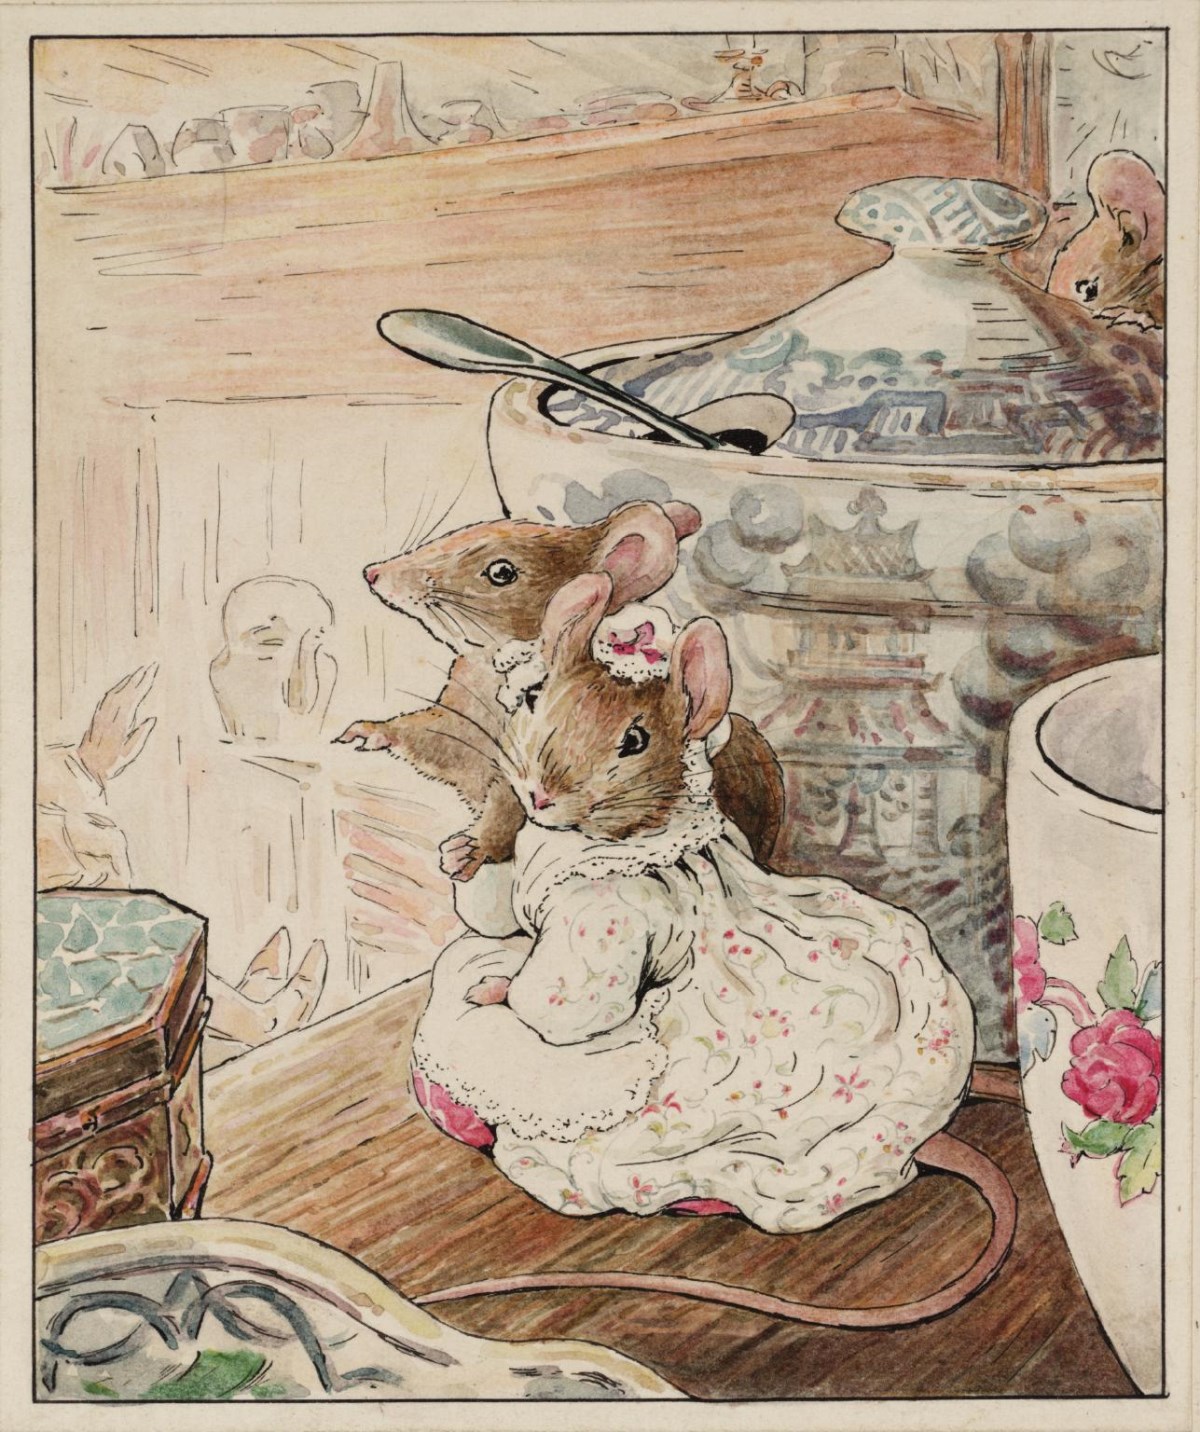 The Mice Listen to the Tailor's Lament c.1902 by Helen Beatrix Potter 1866-1943